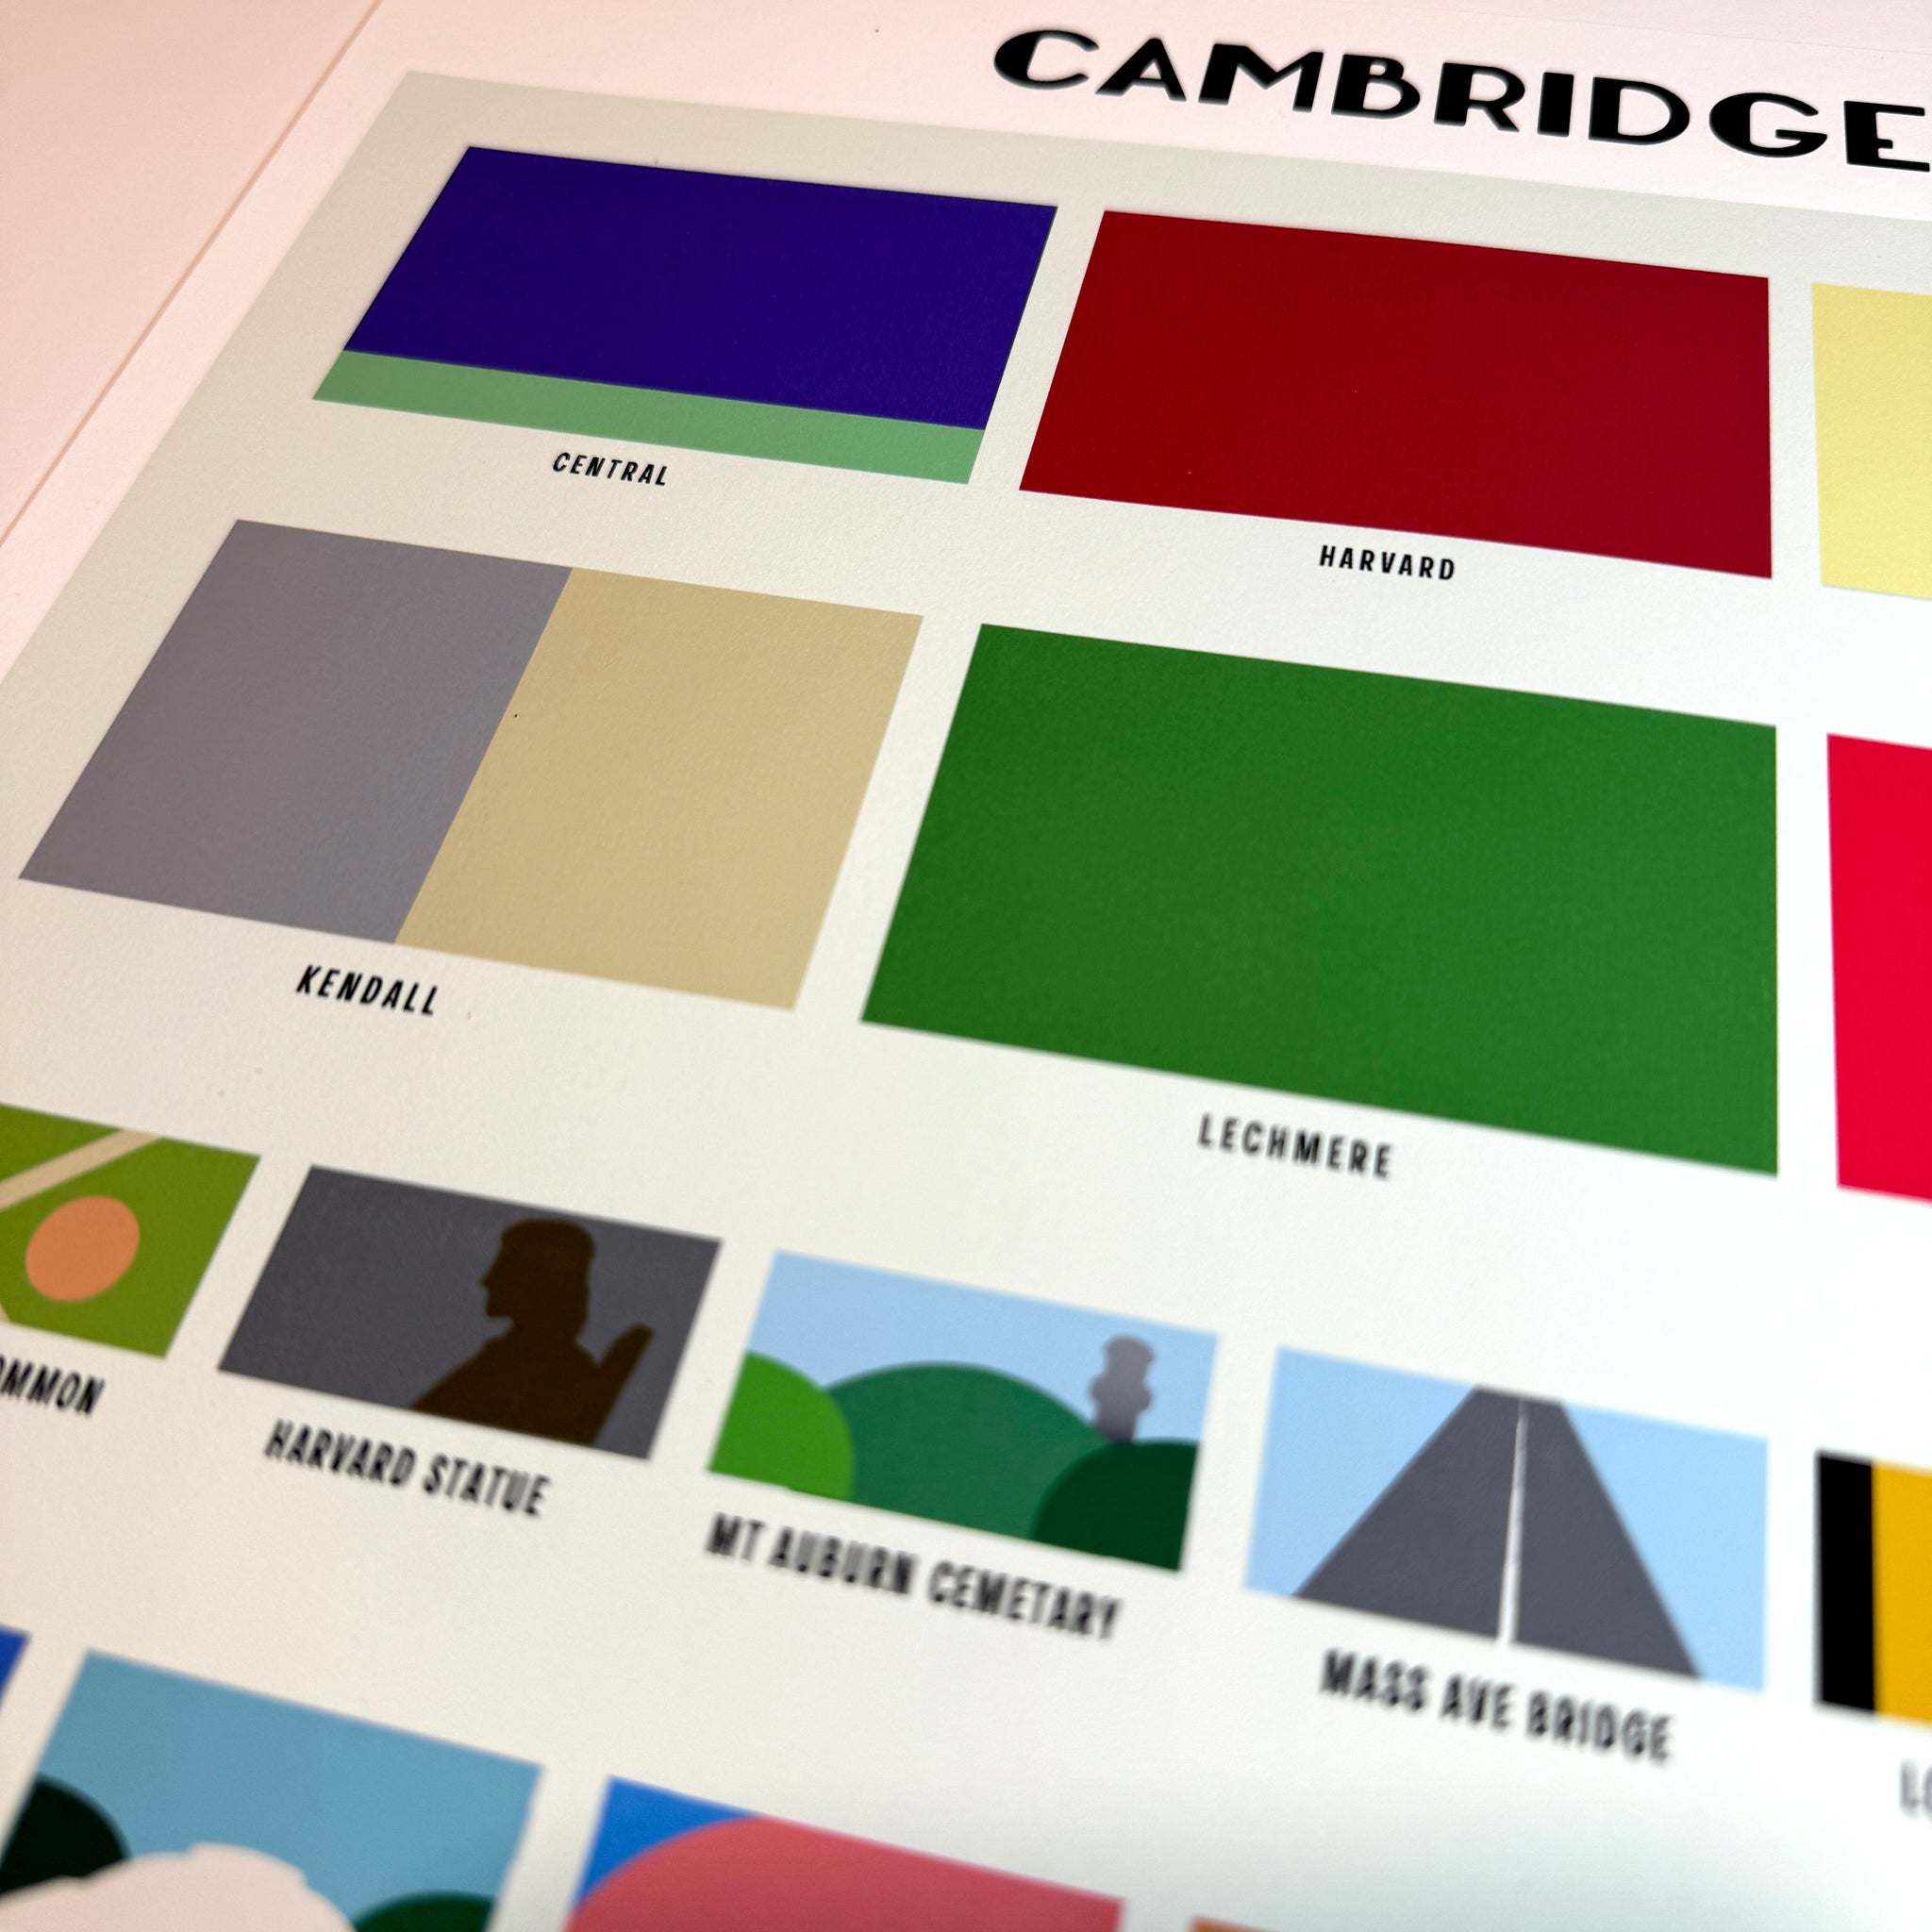 close up of design of cambridge ma with blocks of color respresenting each neighborhood and attraction